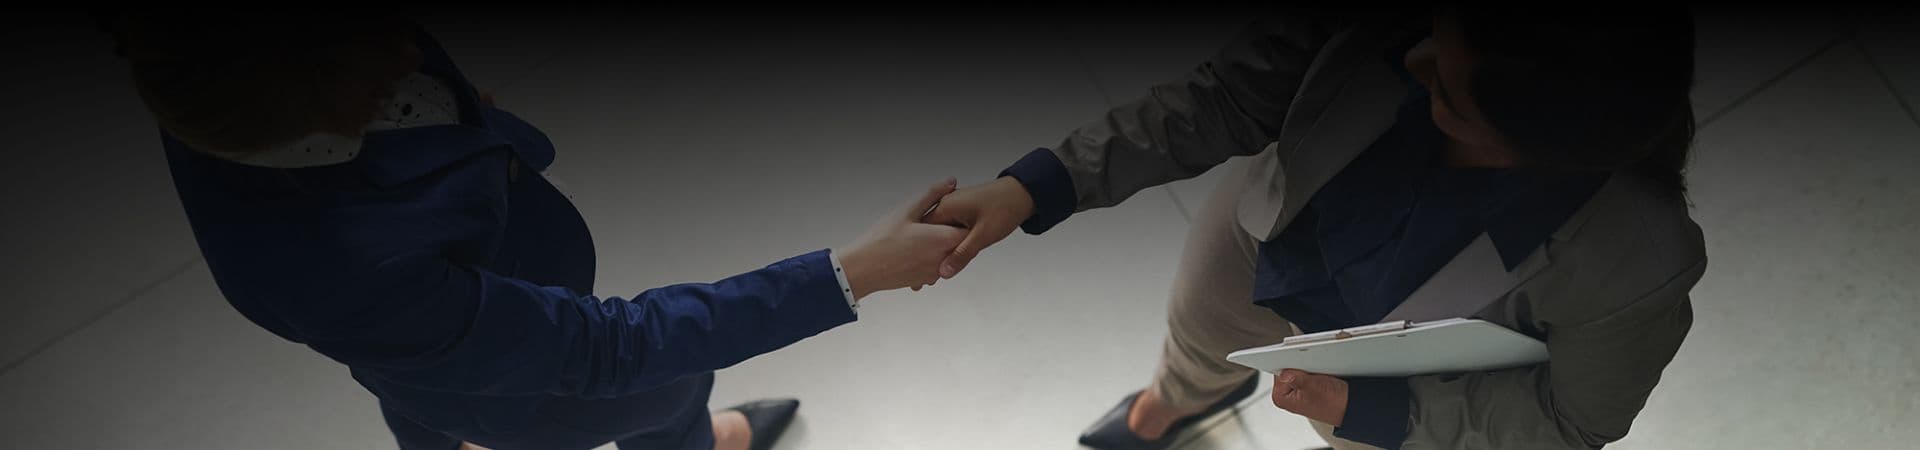 An image showing two people shaking hand with each other.